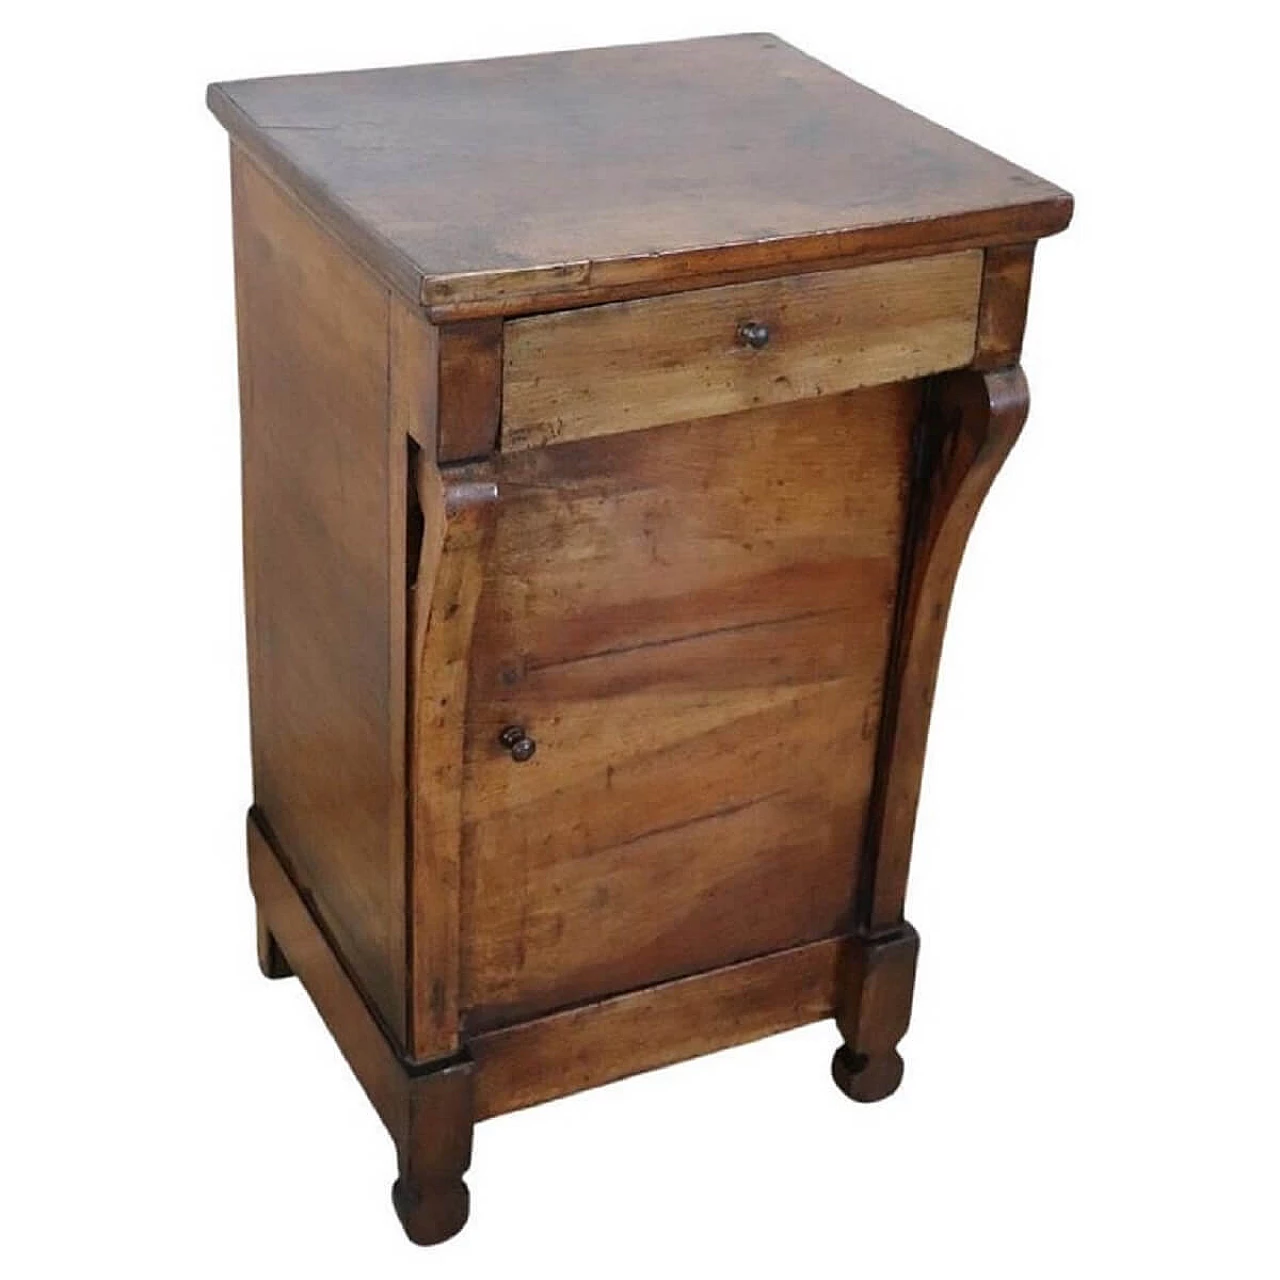 Empire bedside table in solid walnut with decorative braces, early 19th century 1